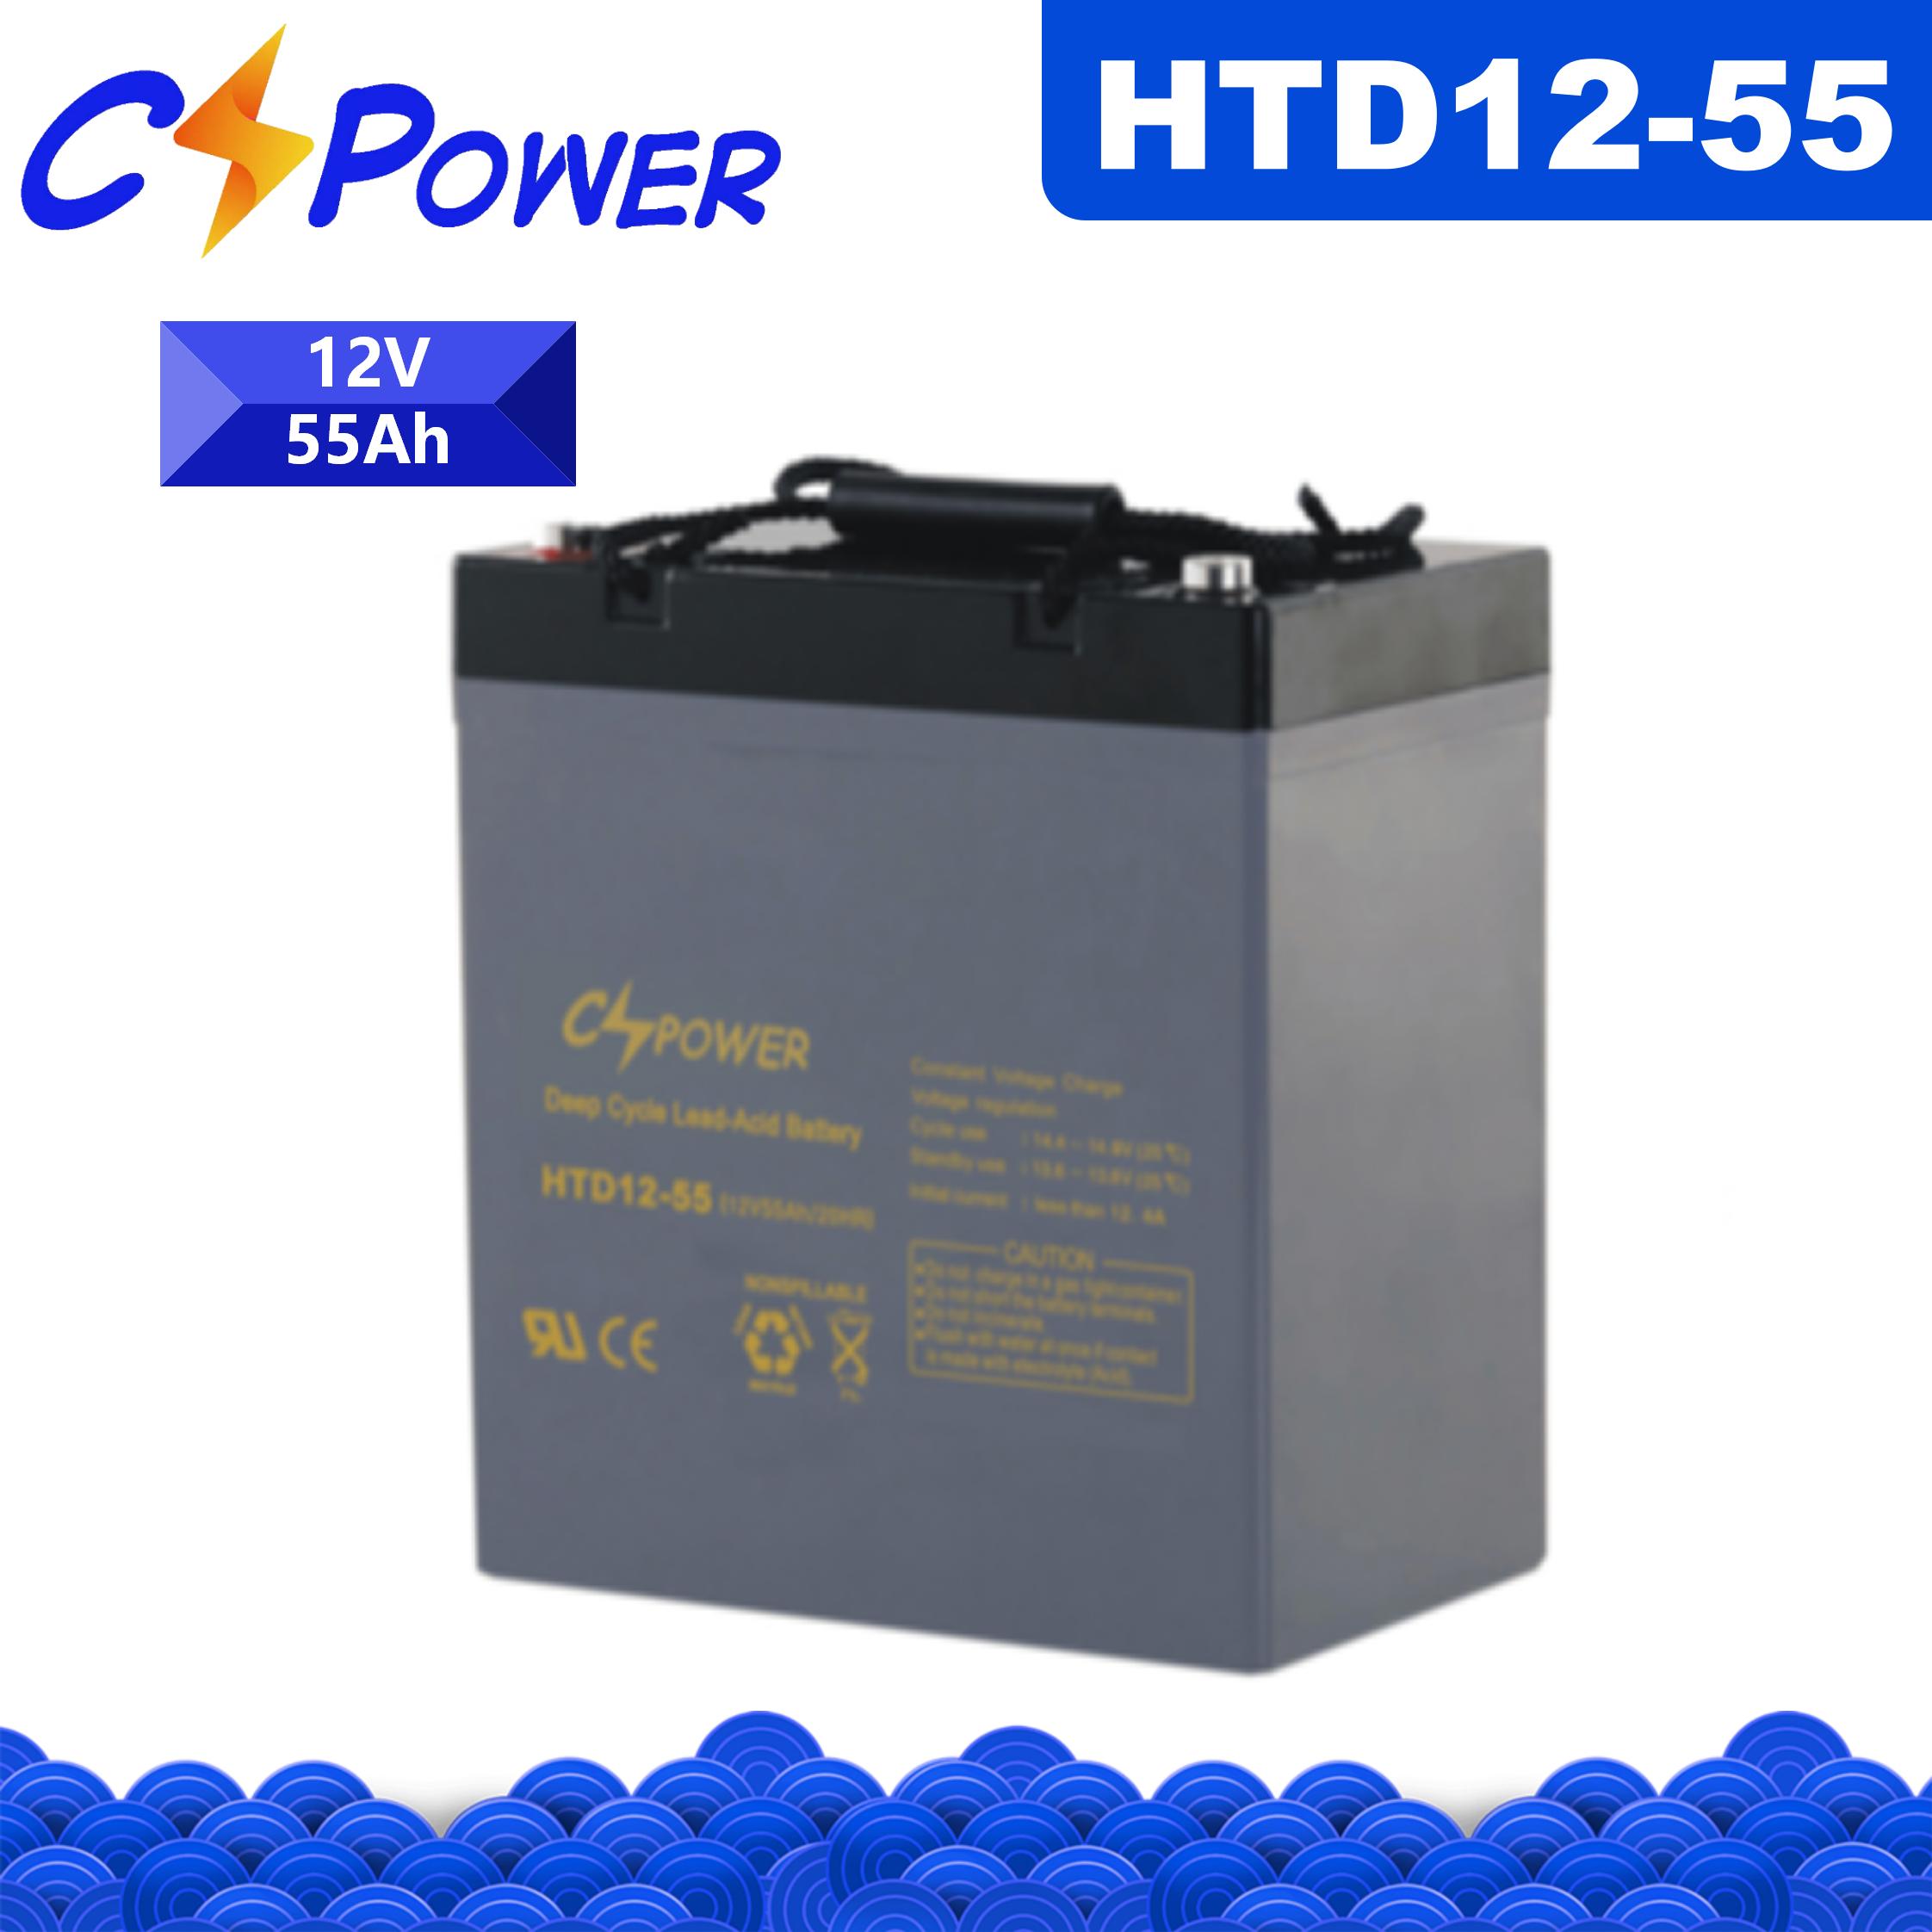 CSPower HTD12-55 Deep Cycle VRLA AGM Battery